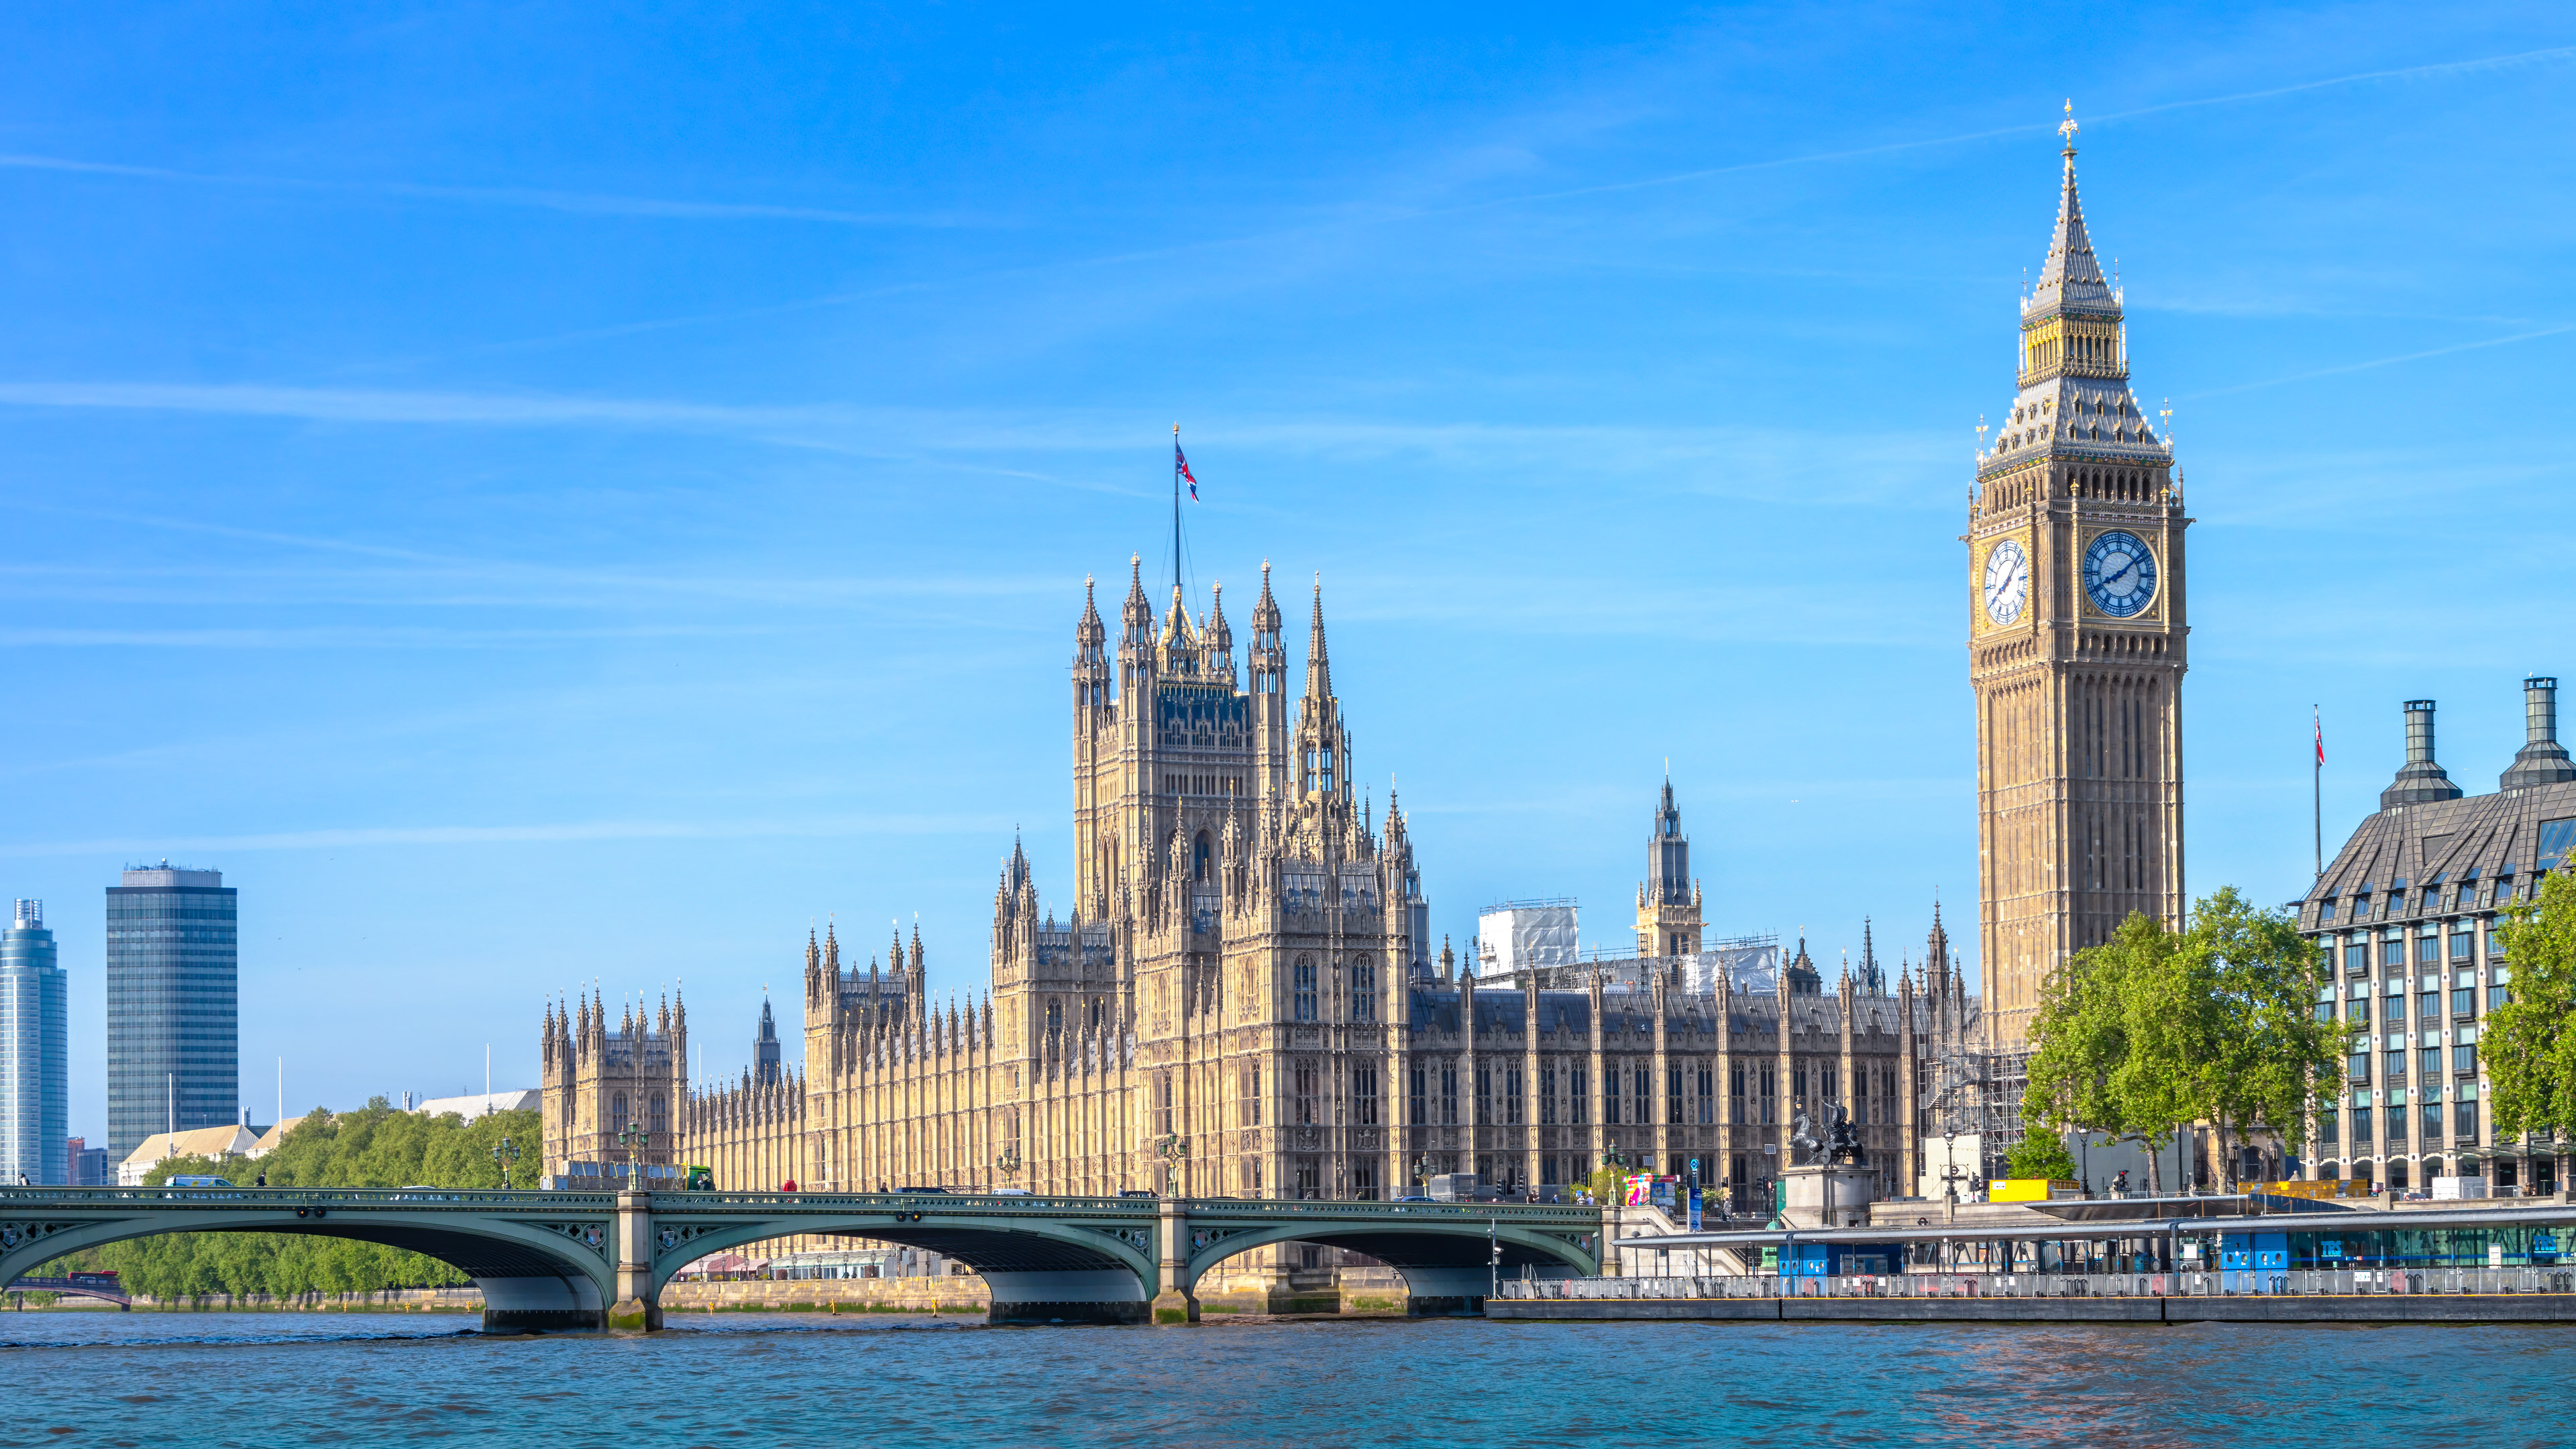 Get a glimpse of the big city with our wallpaper showcasing London’s iconic Big Ben on a crisp morning, and let your device become a window to the bustling energy of urban life.